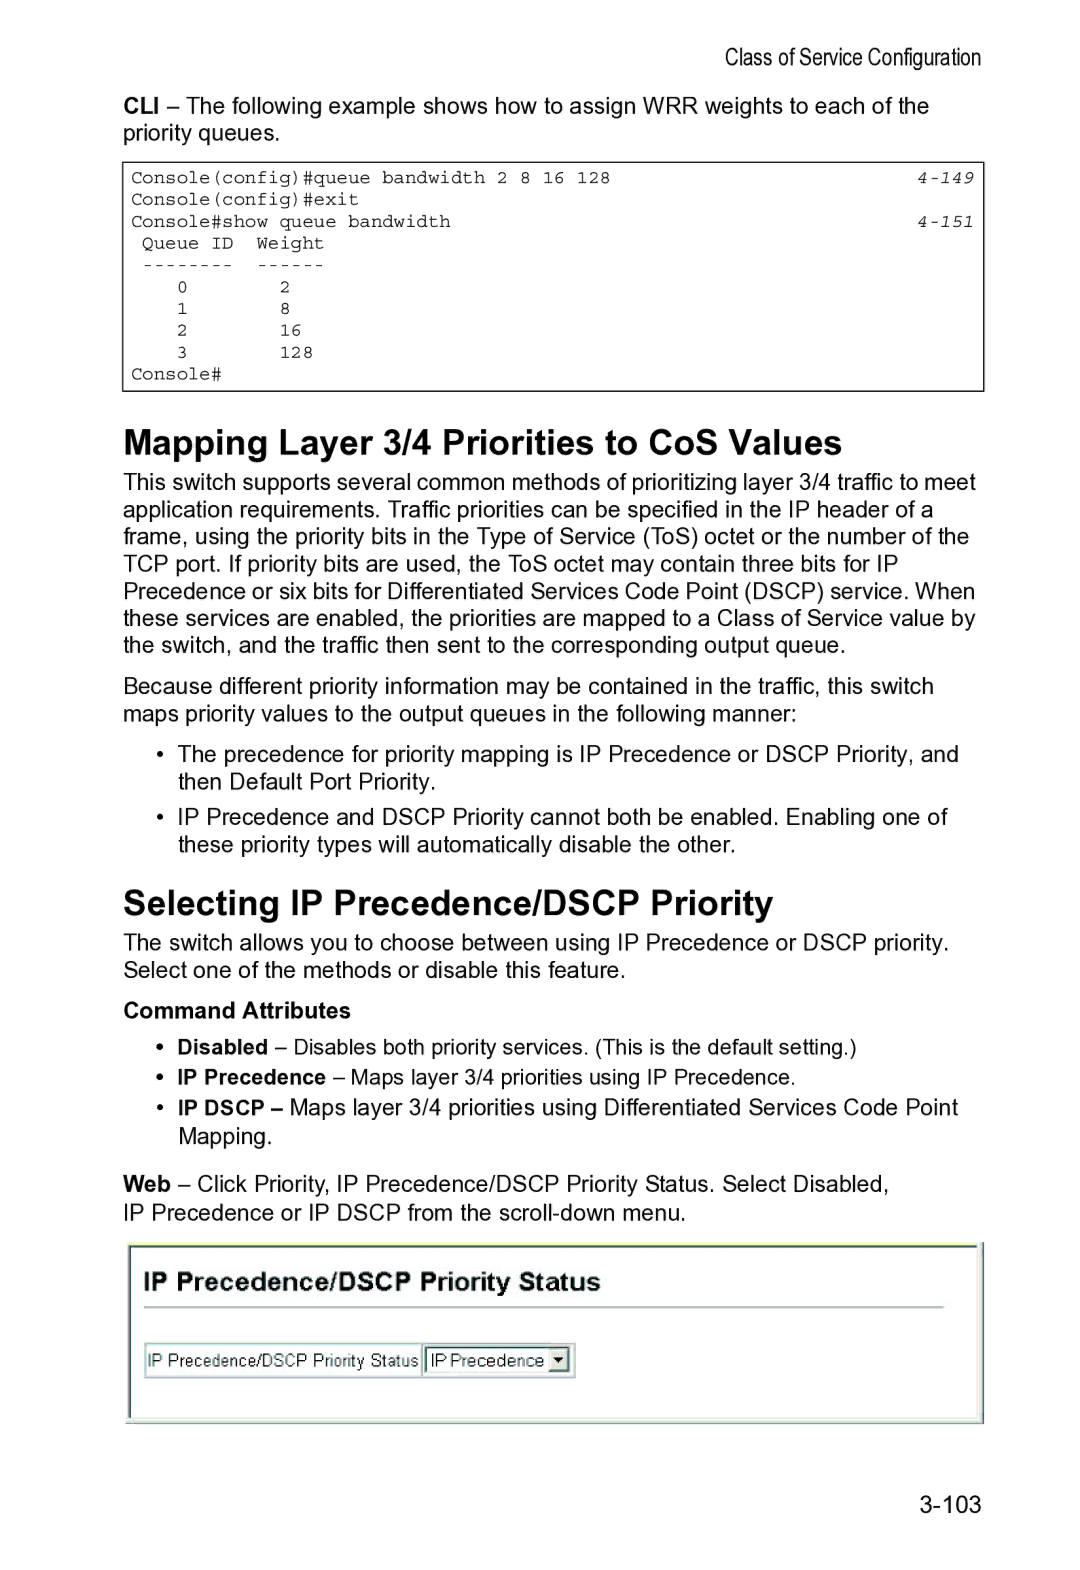 Accton Technology VS4512DC manual Mapping Layer 3/4 Priorities to CoS Values, Selecting IP Precedence/DSCP Priority 